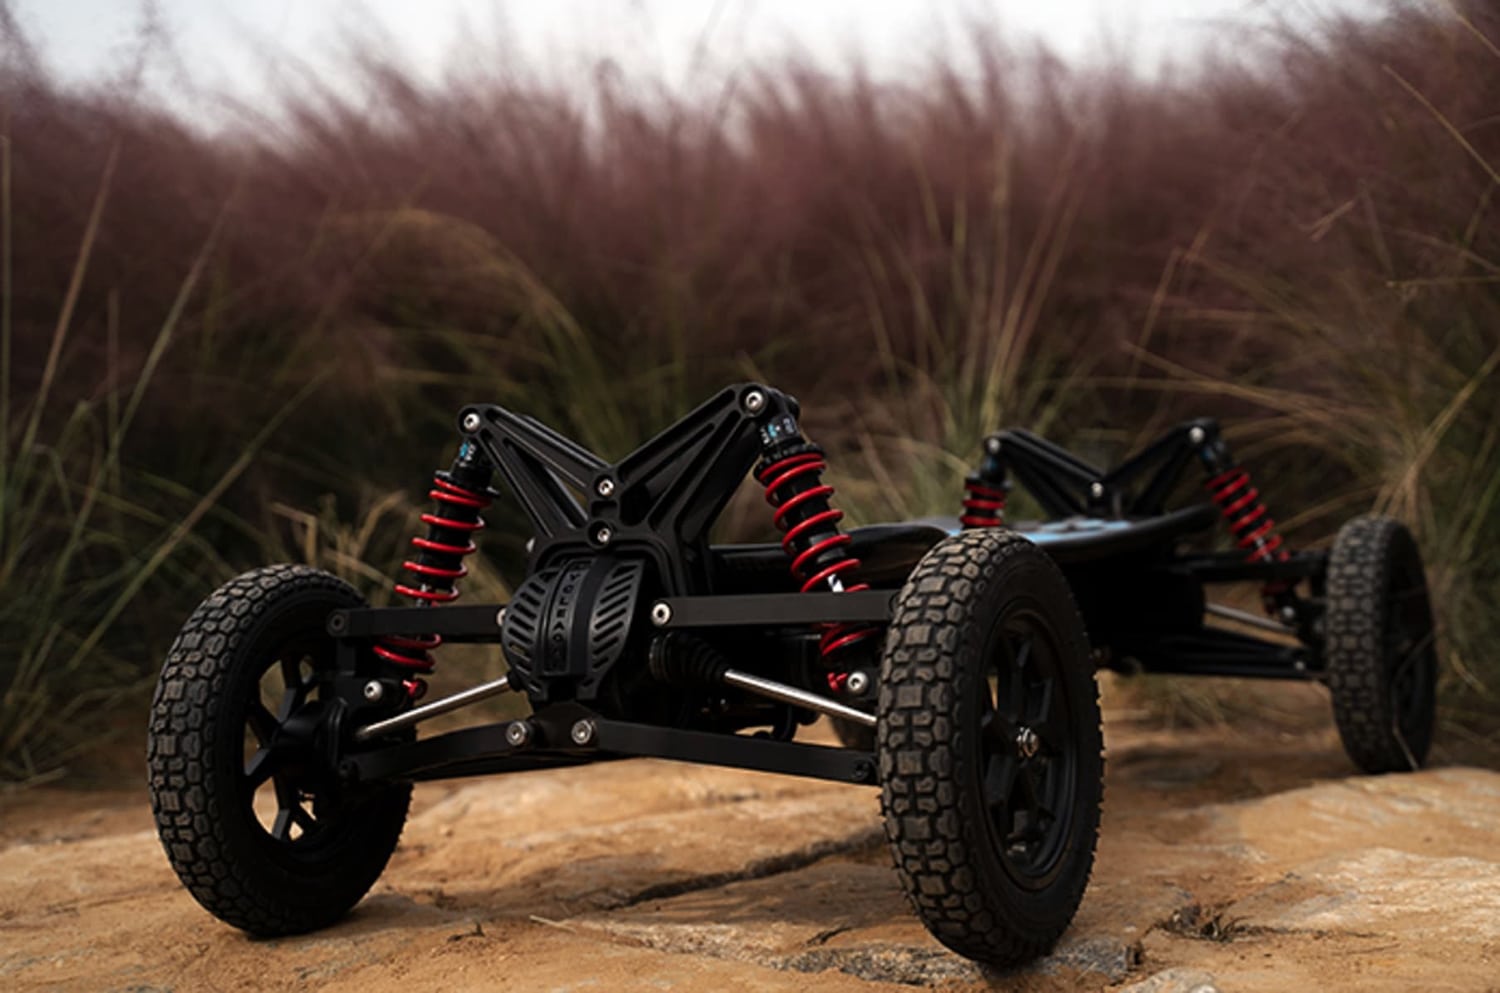 Cycleagle electric off-road skateboard opens up new possibilities for fun.